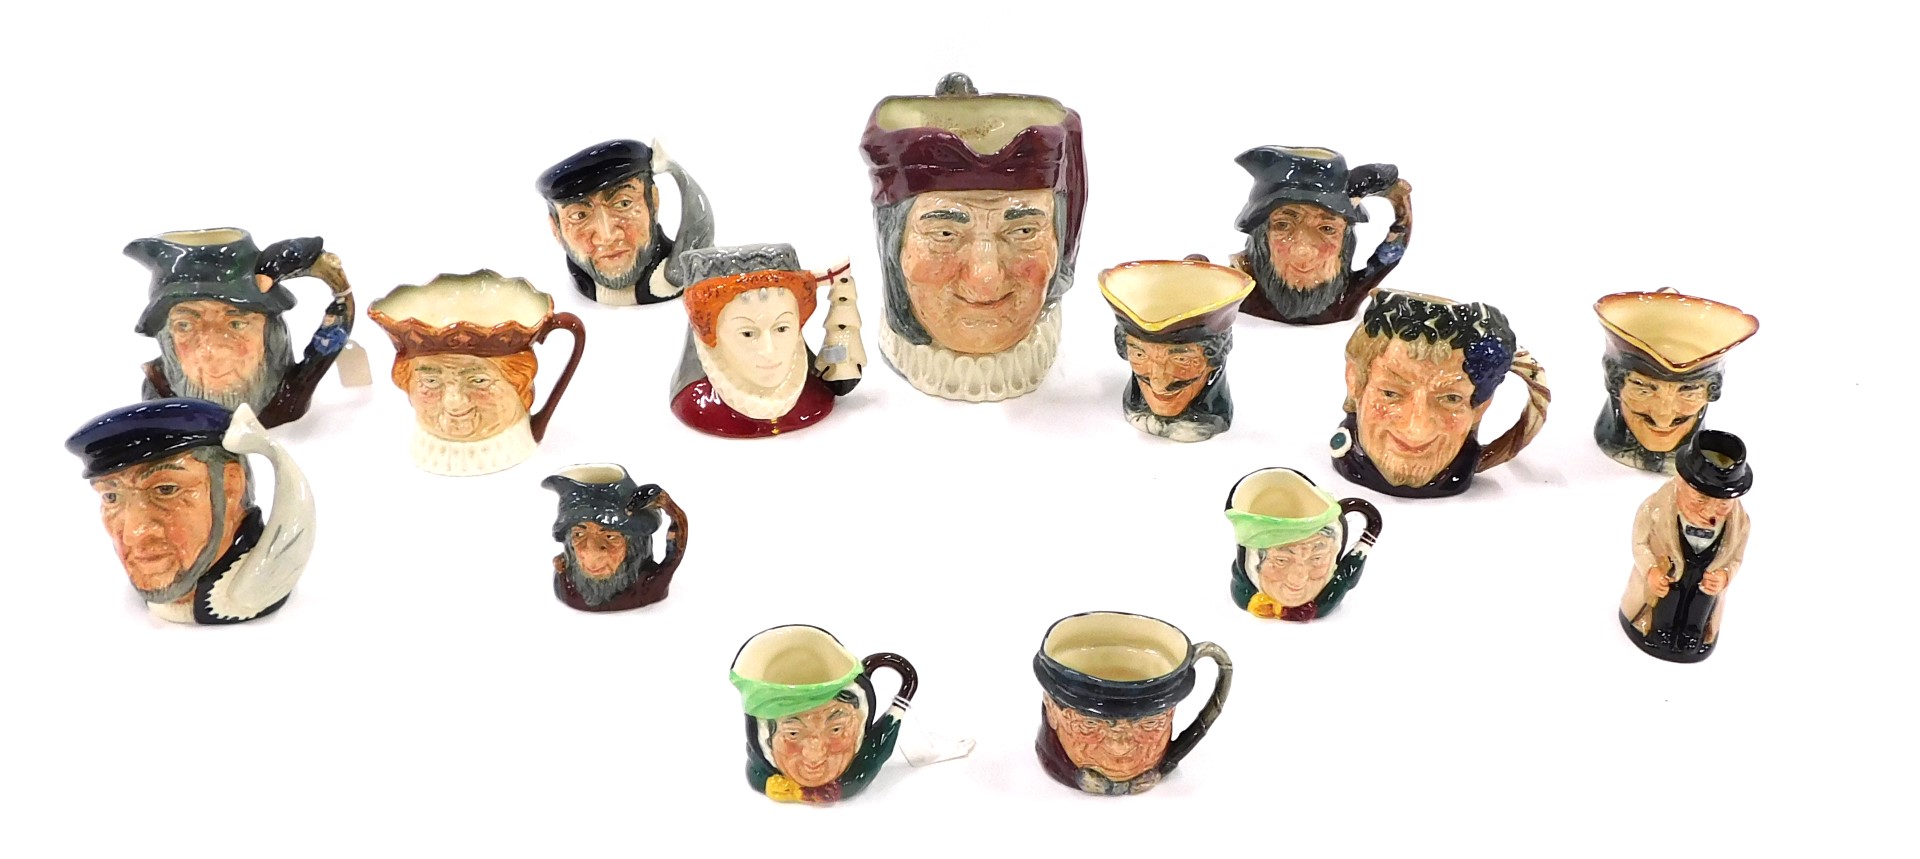 A quantity of Royal Doulton character jugs, to include Simon the Sellerman (large) Rip Van Winkle (x